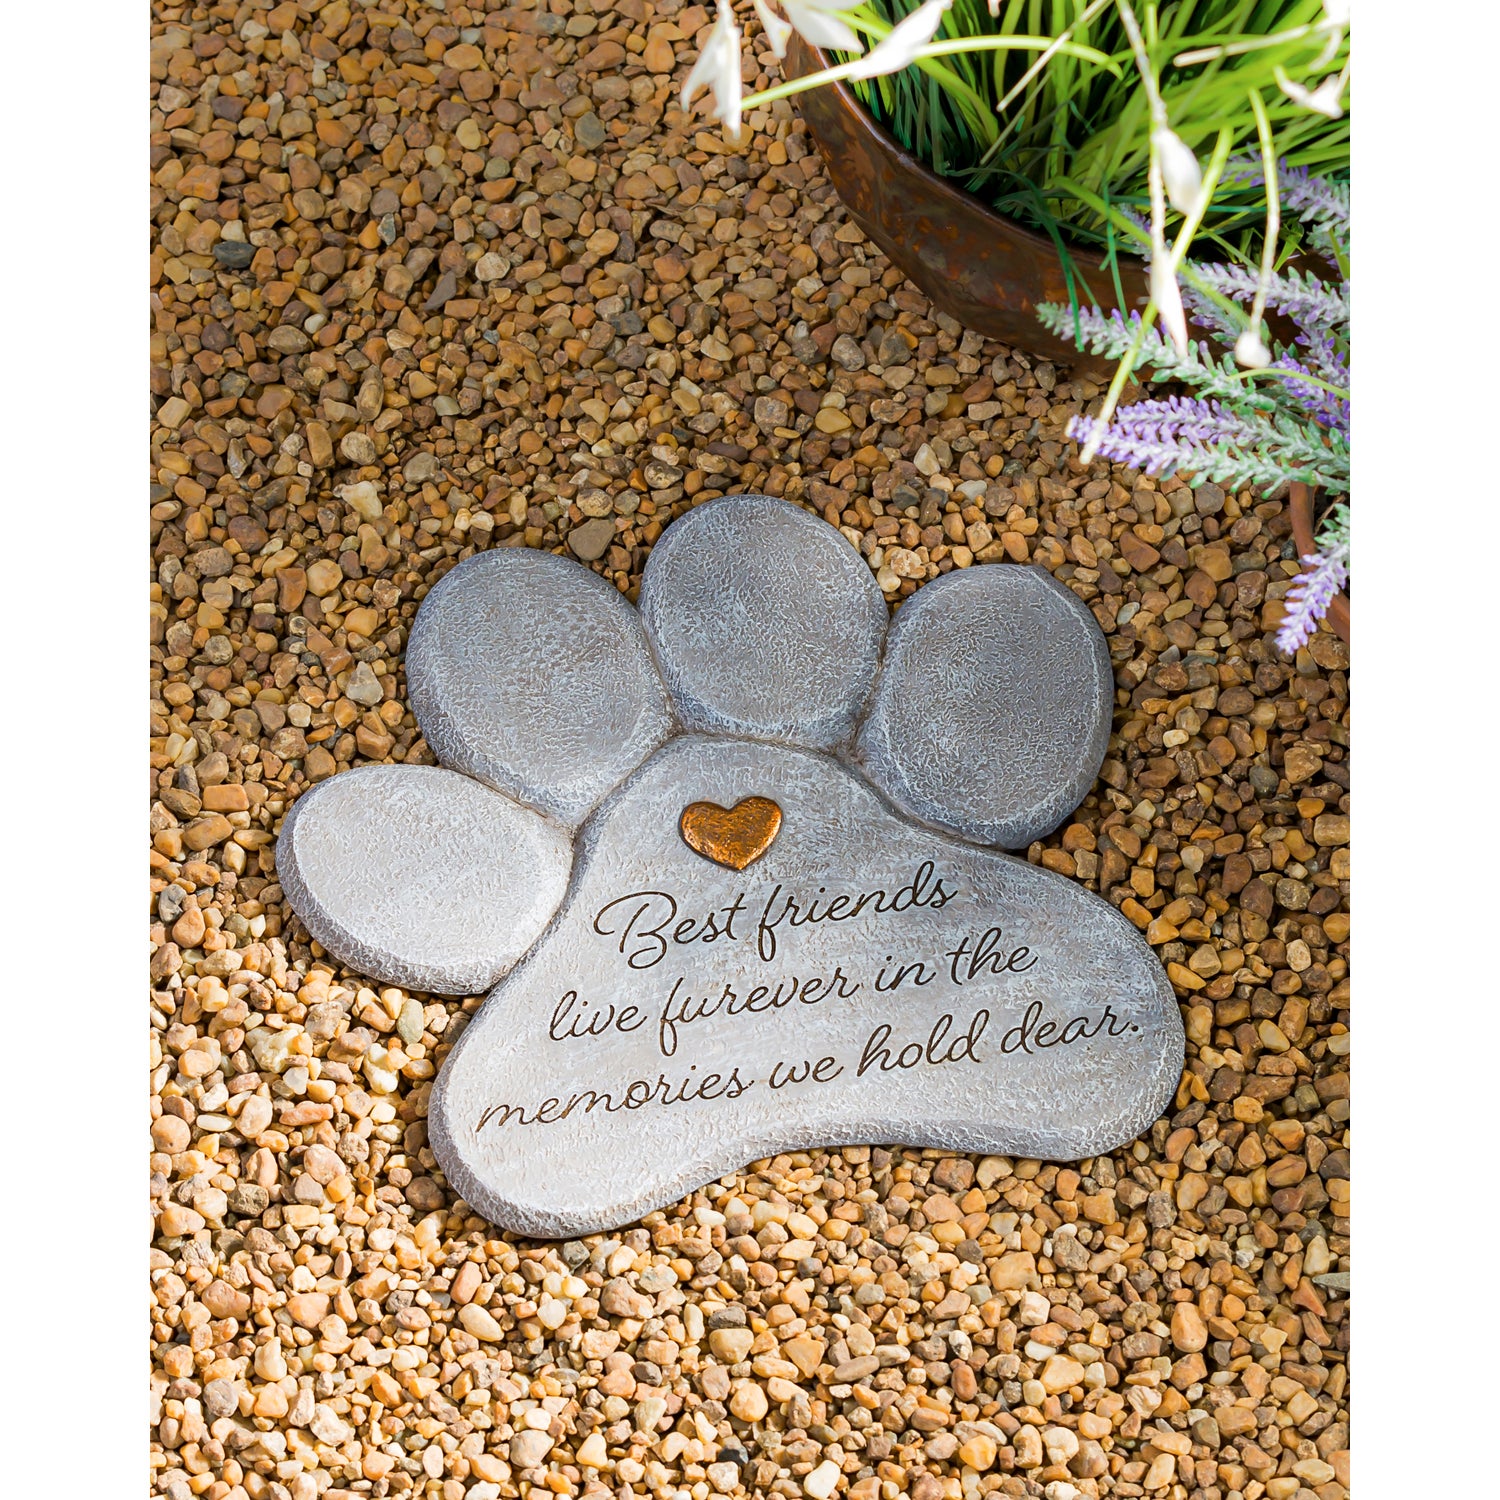 Dog Silhouette 11" Paw Shaped Pet Memorial Garden Stone, Best Friends Live Forever